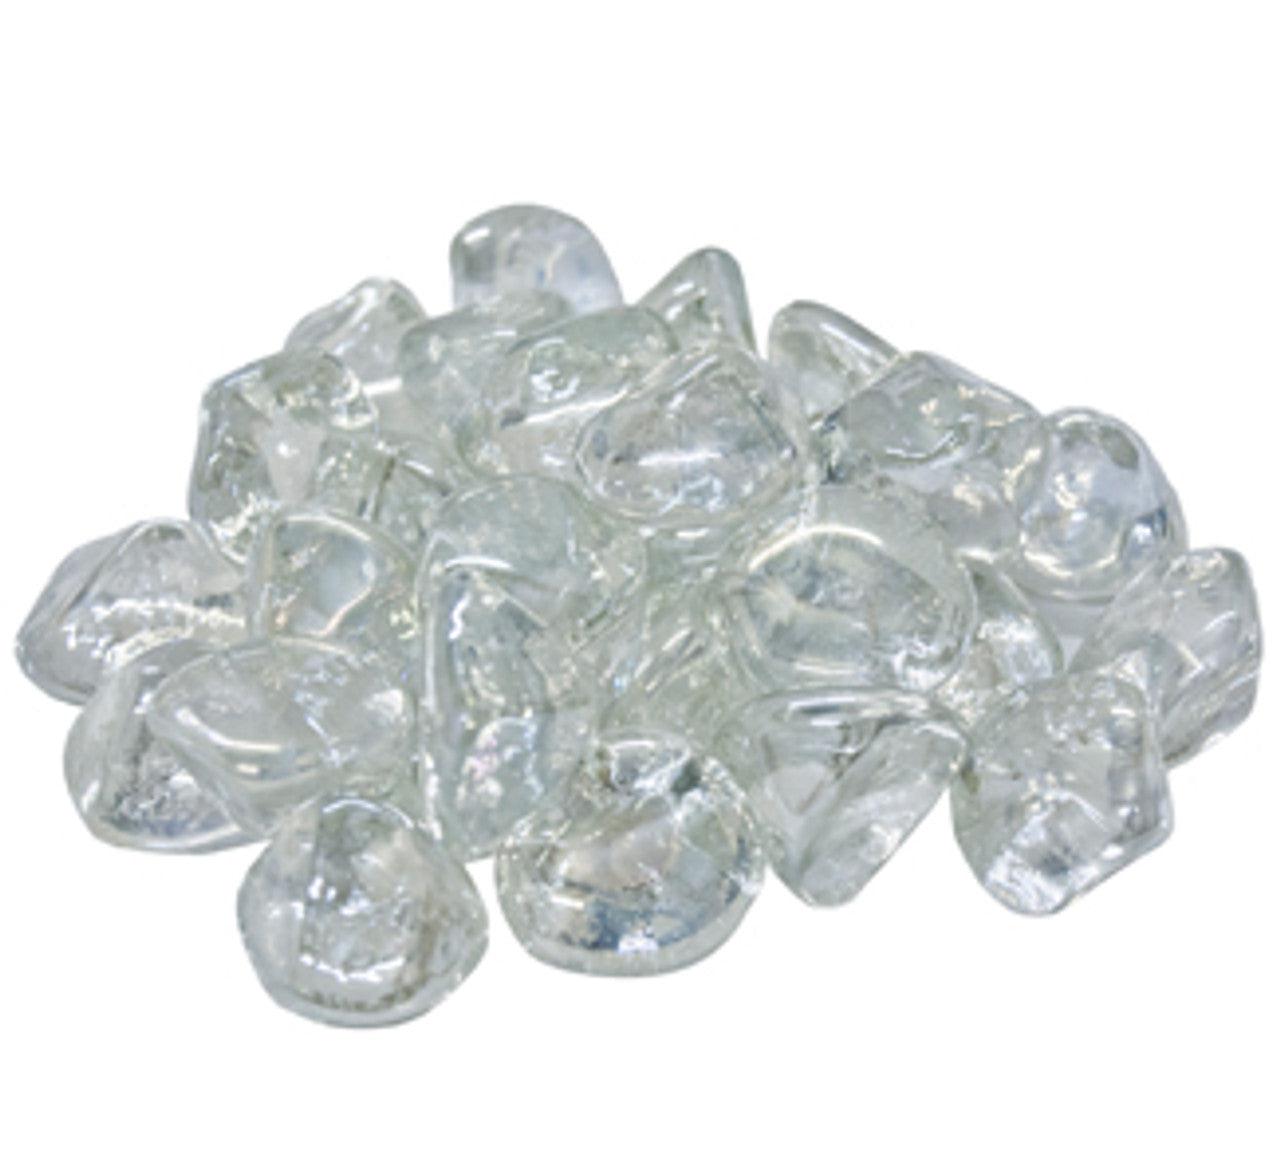 60 lb. Package of Diamond Nuggets Glass Media